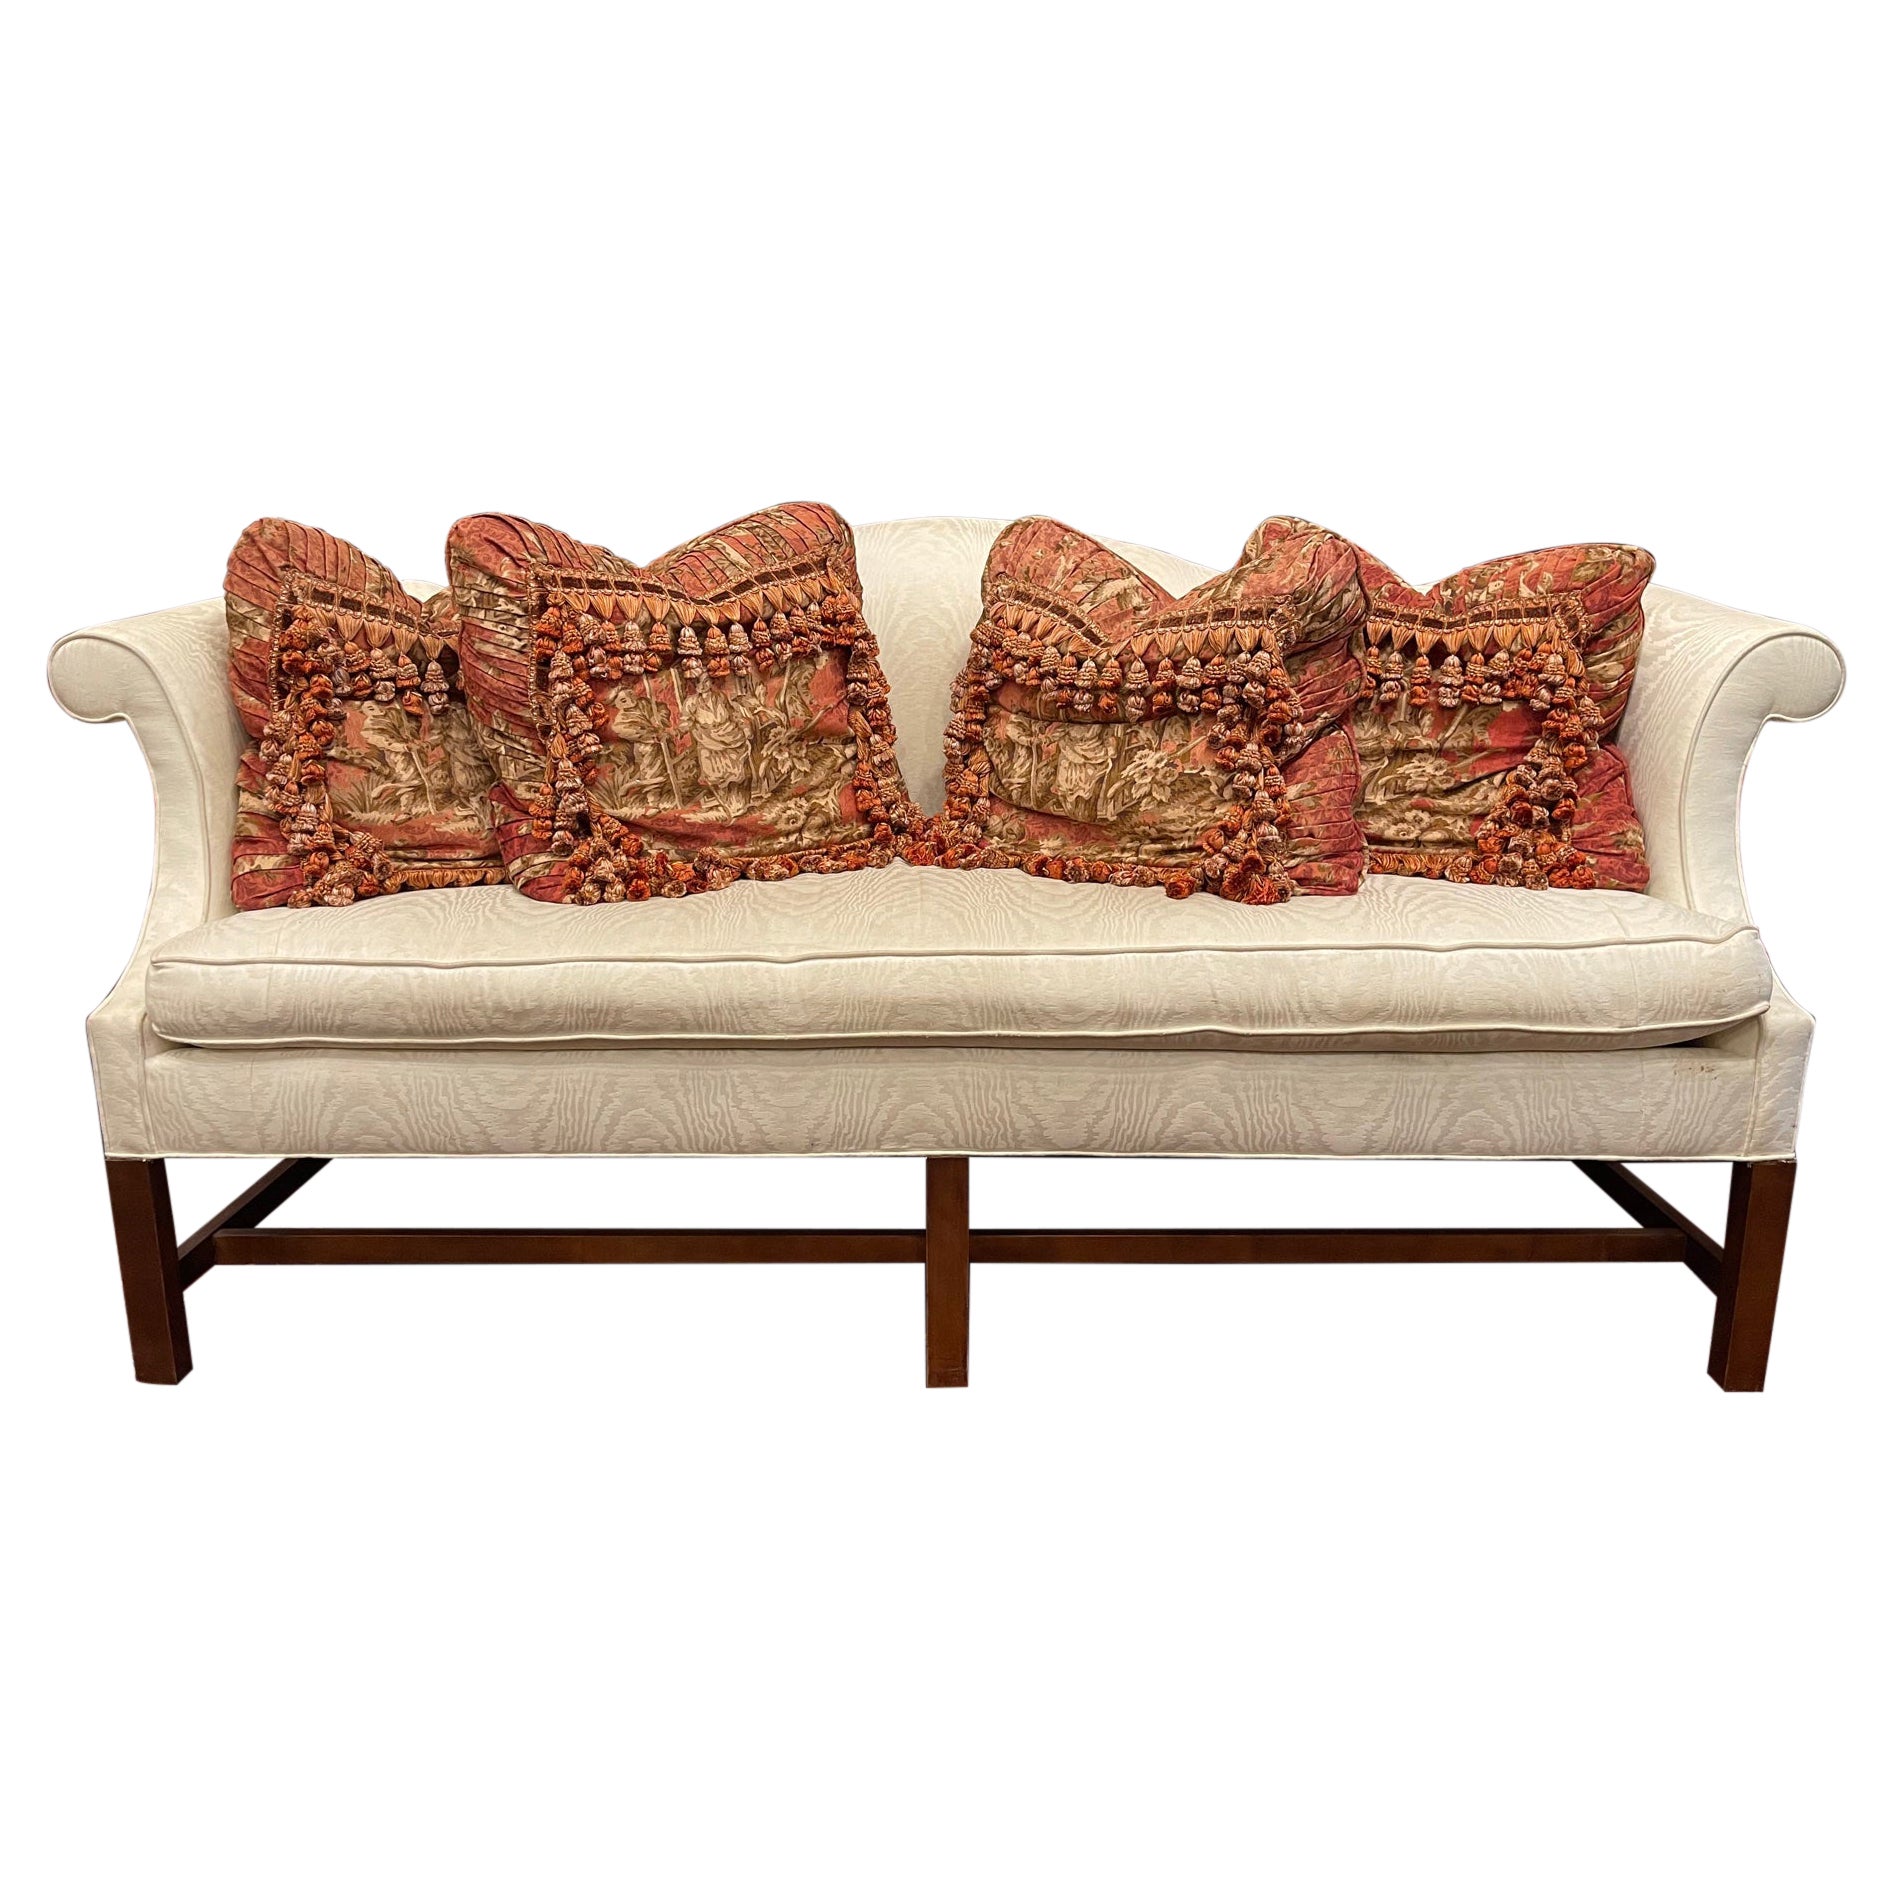 Chippendale Style Camelback Sofa with a Single Seat Cushion, 20th Century